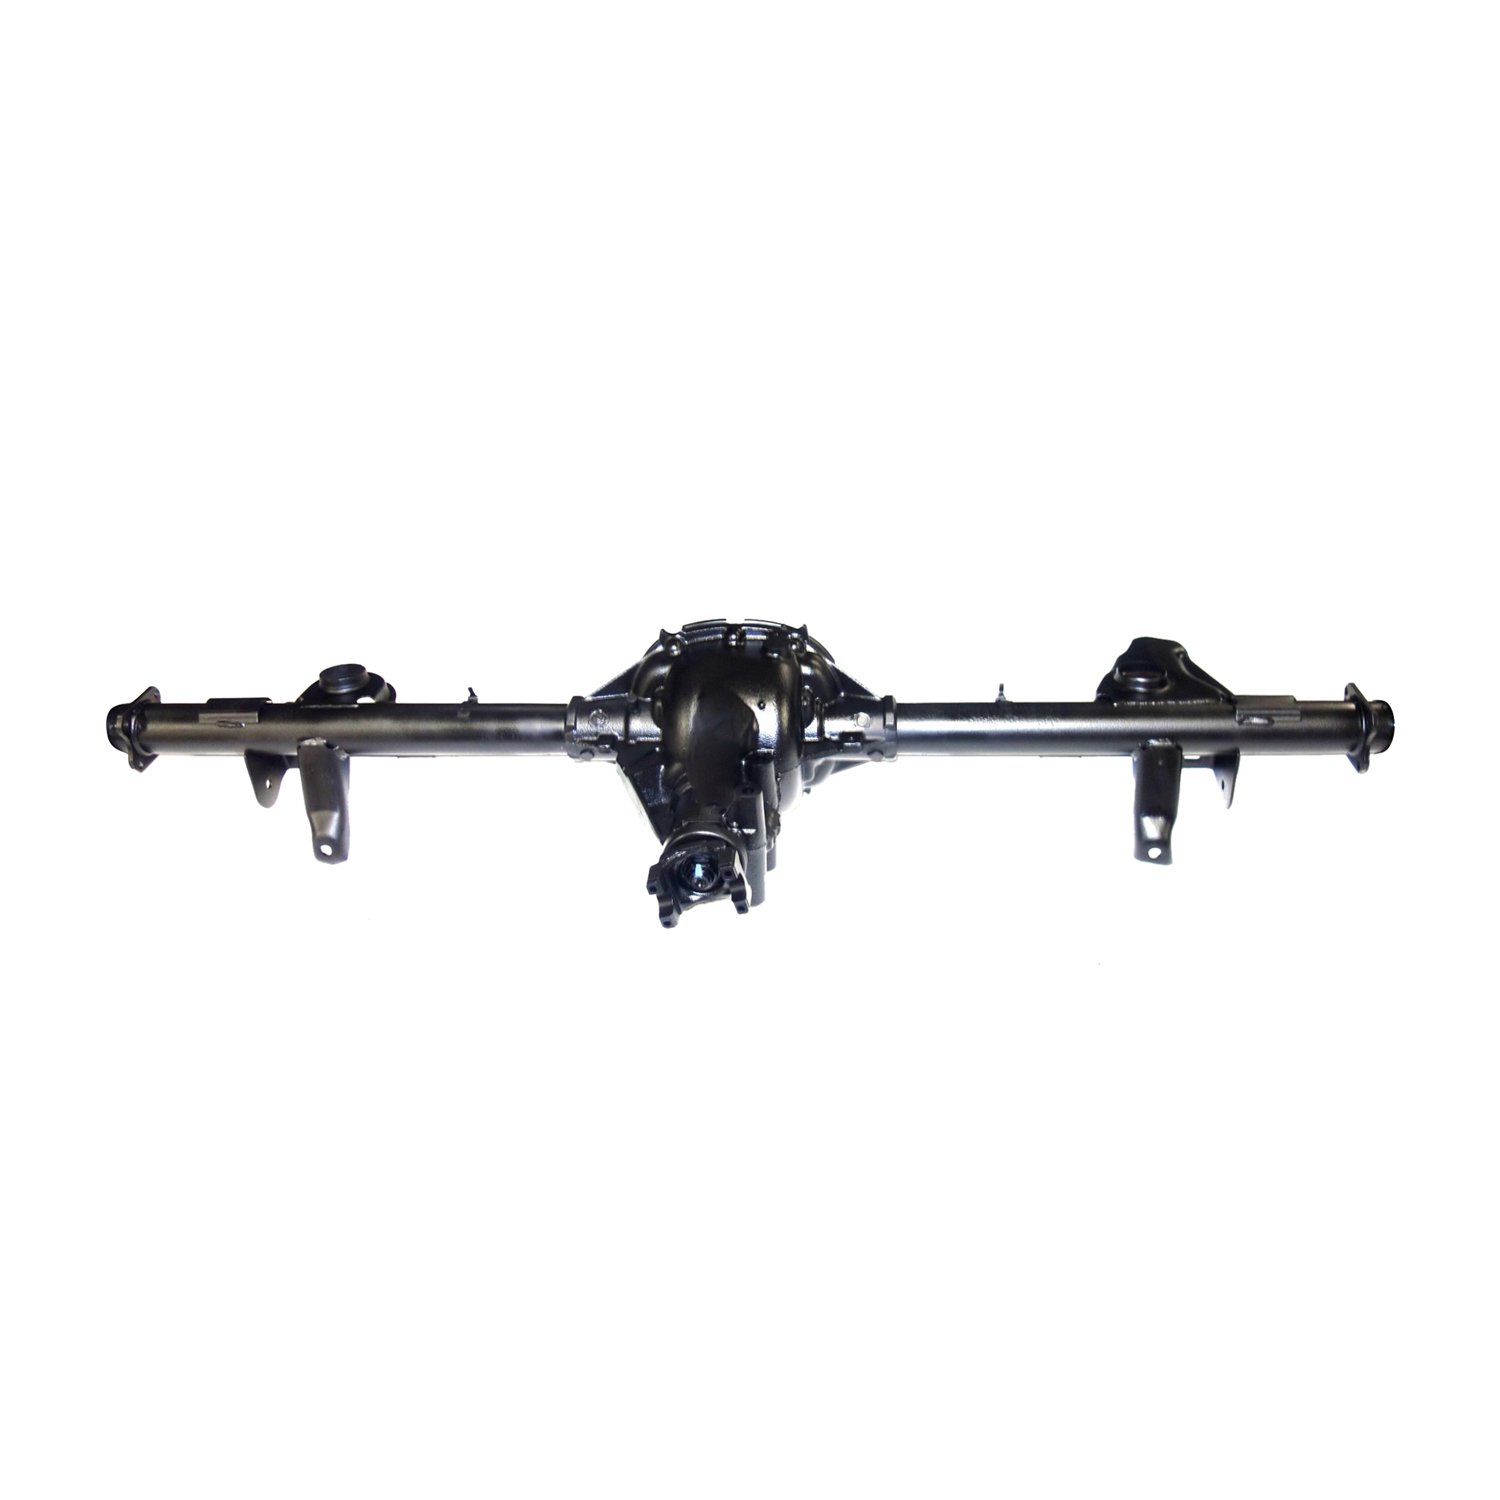 Remanufactured Axle Assy for GM 7.5" 98-03 S10 & S15 3.42 , 2wd, Chassis Pkg, Posi LSD